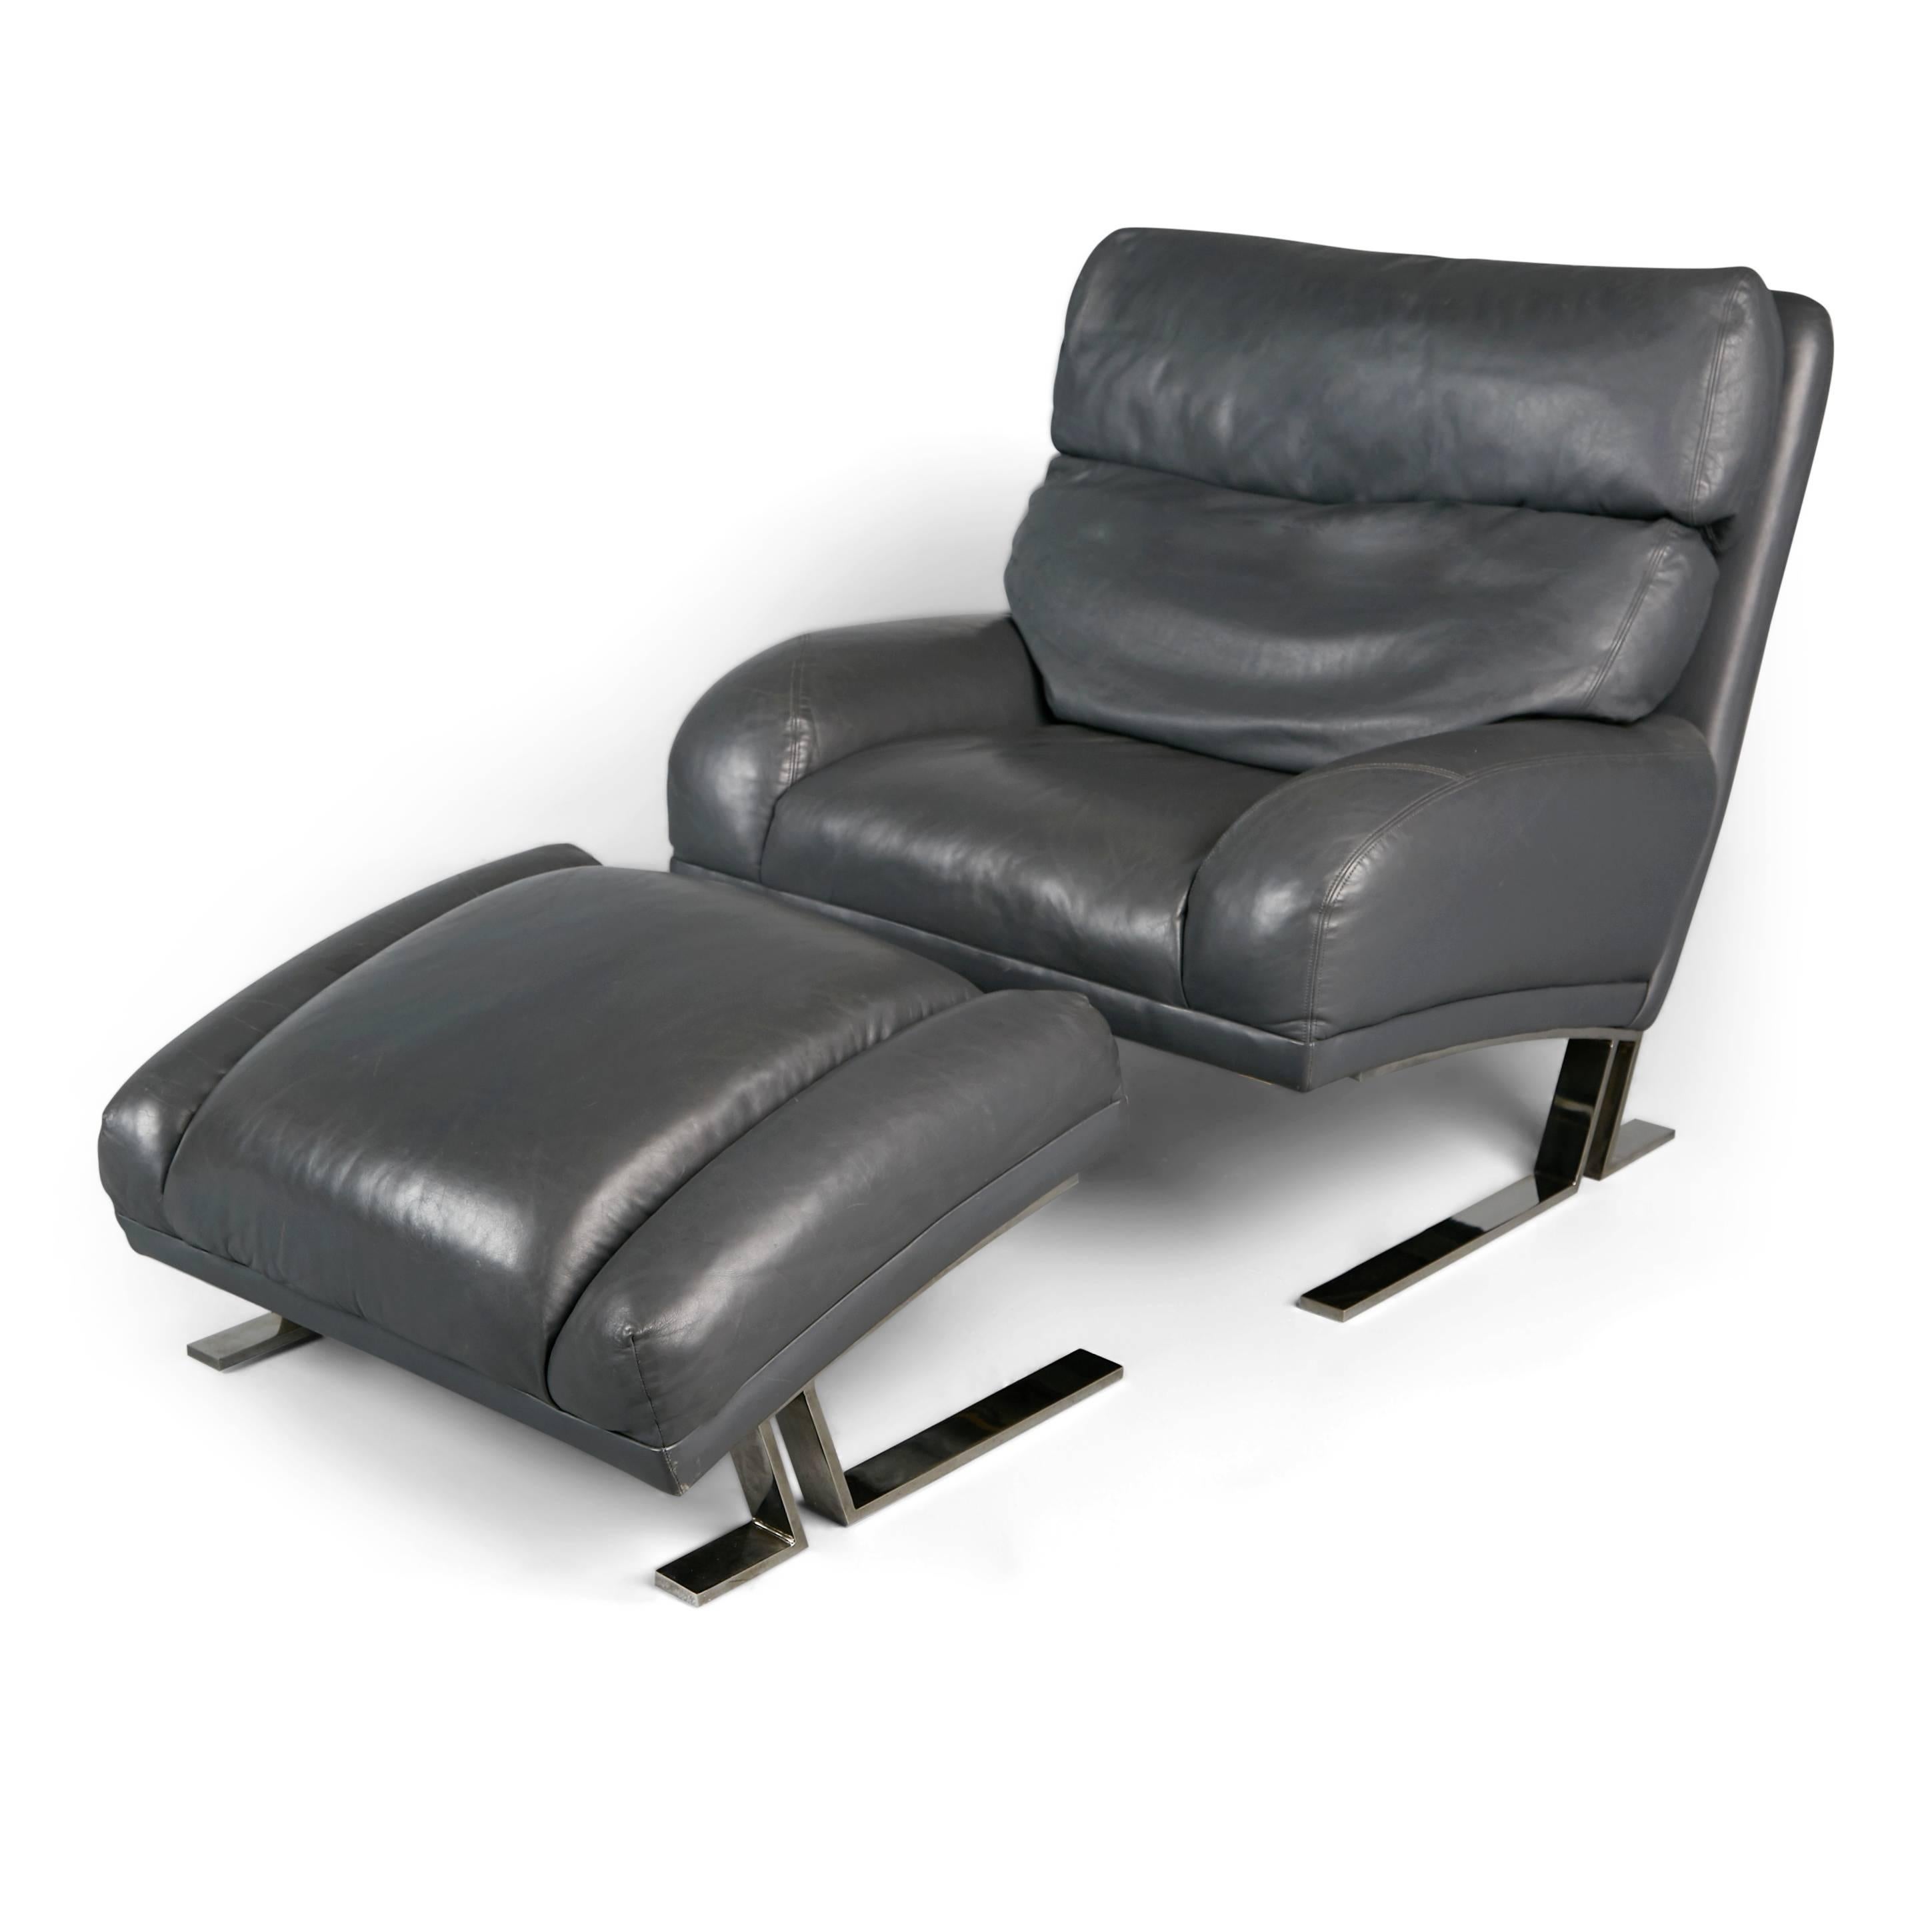 Larger-scale and vastly comfortable grey leather lounge chair and matching ottoman by Milo Baughman for Directional. This handsome pair is comprised of a sleek, minimal design favoring curved attributes with chrome cantilever legs supporting both